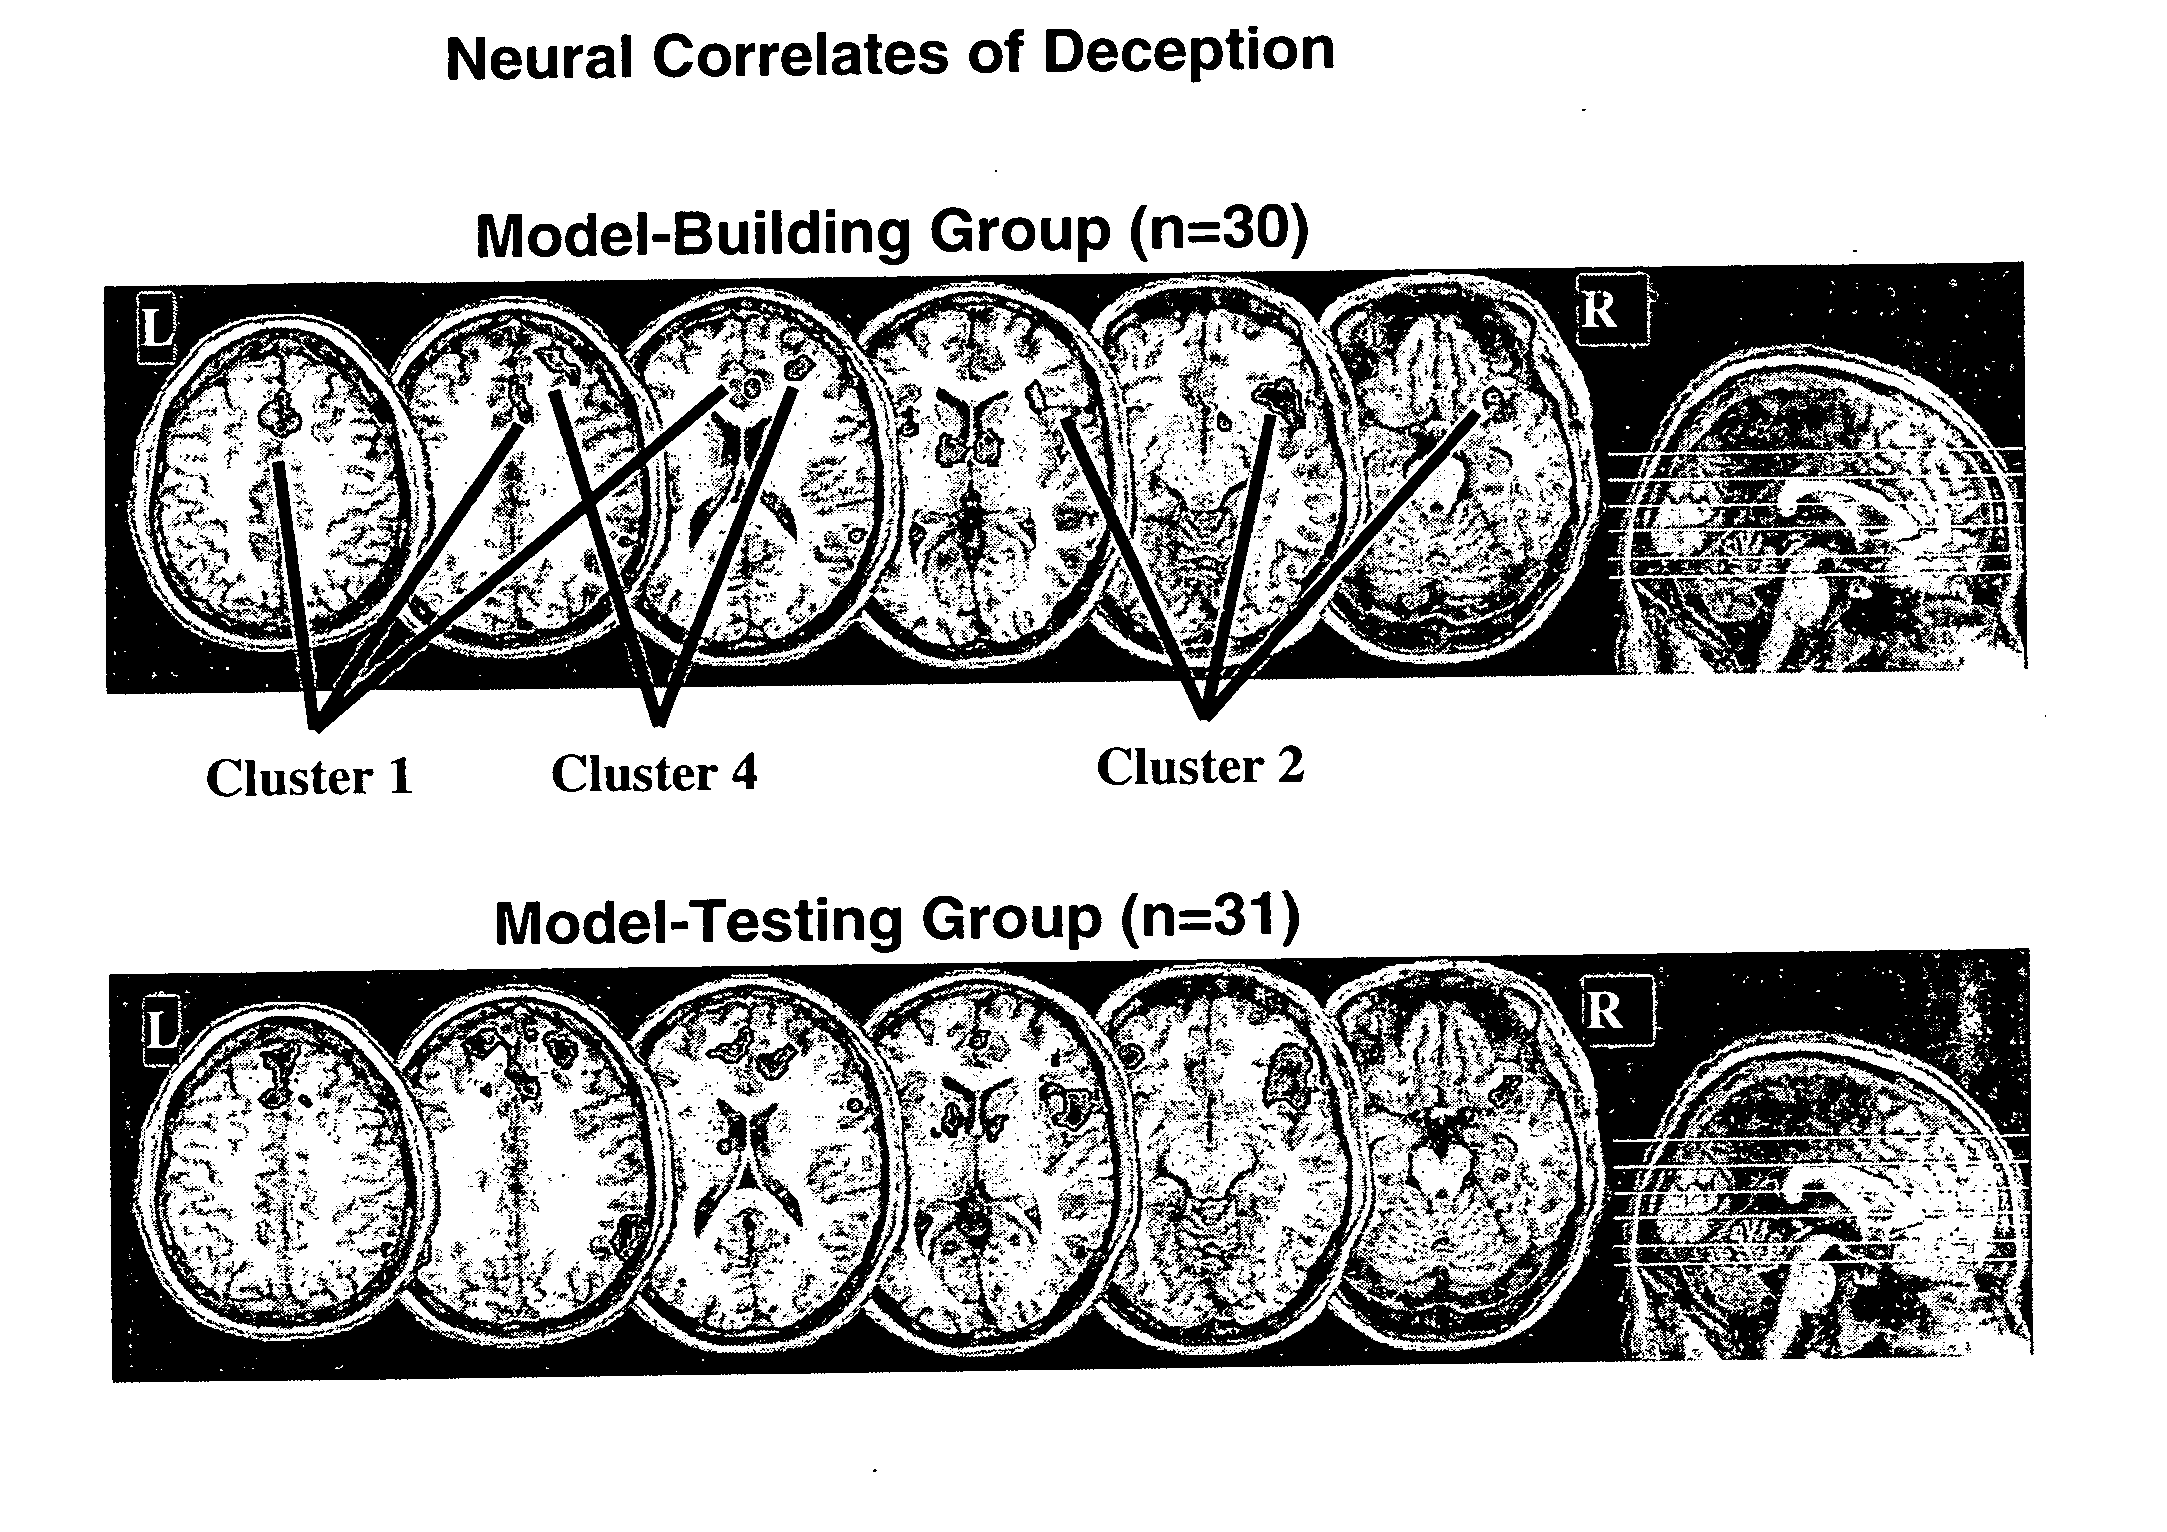 Questions and control paradigms for detecting deception by measuring brain activity